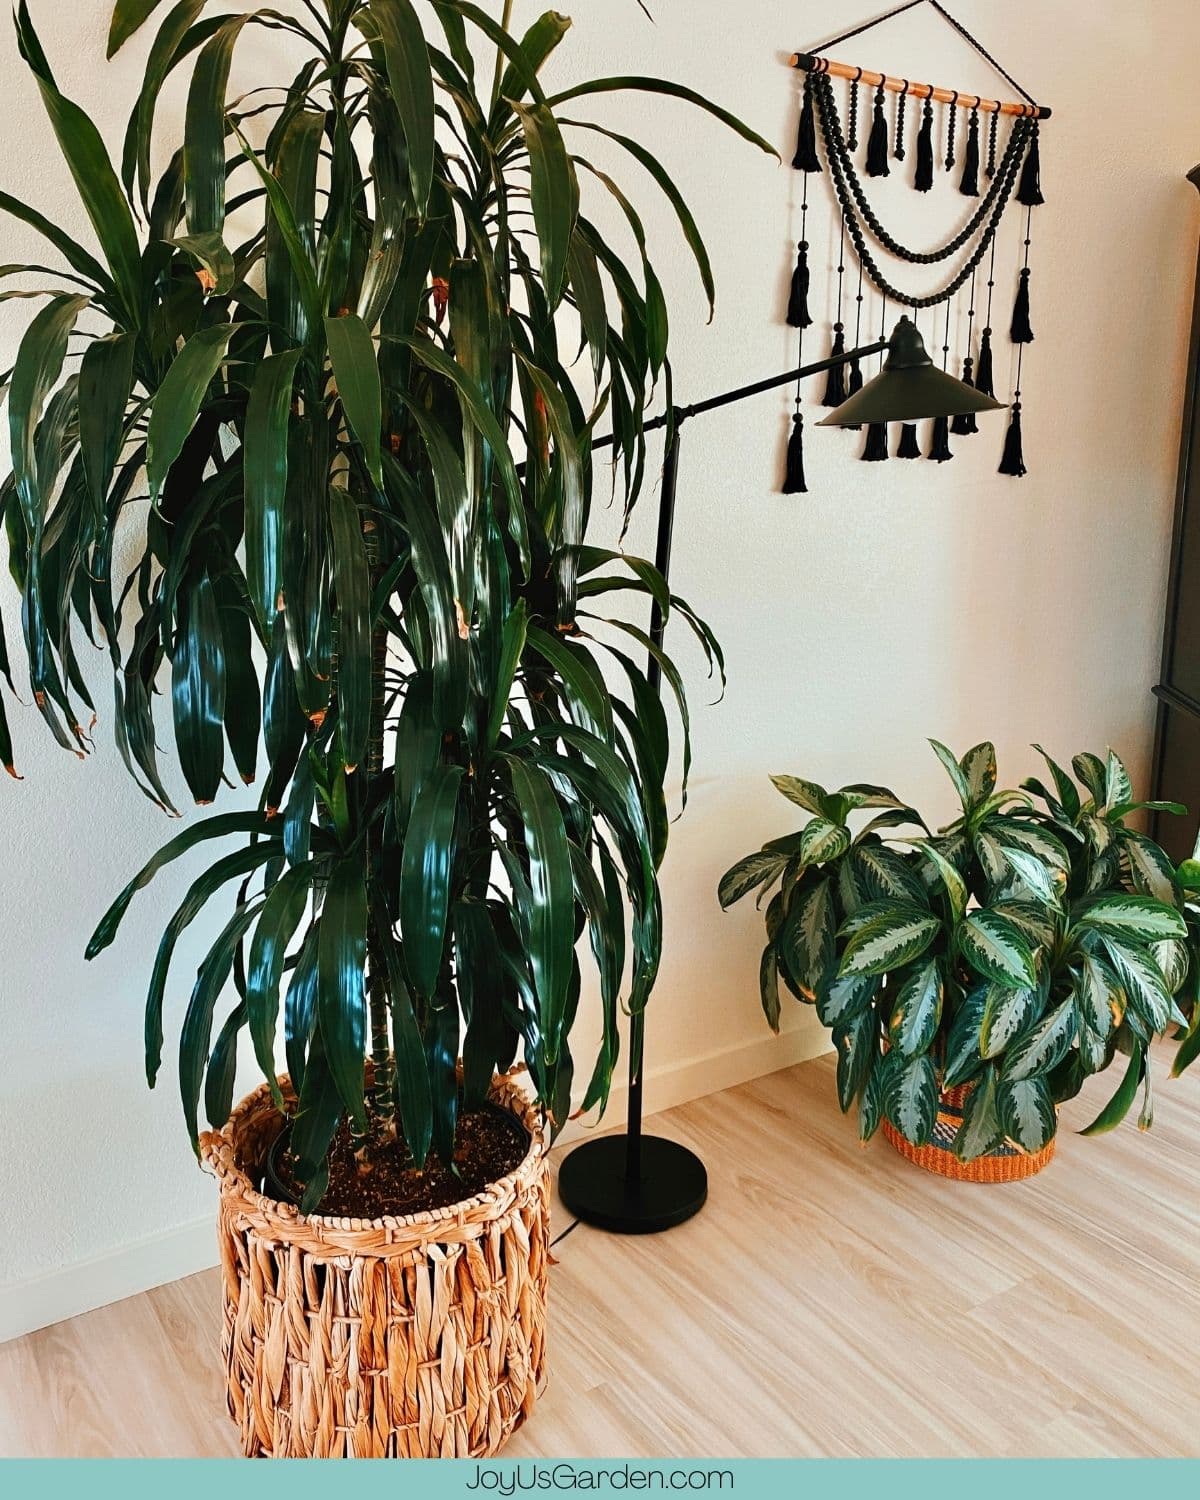 Two houseplants displayed on the floor in large baskets with a lamp & a wall hanging.